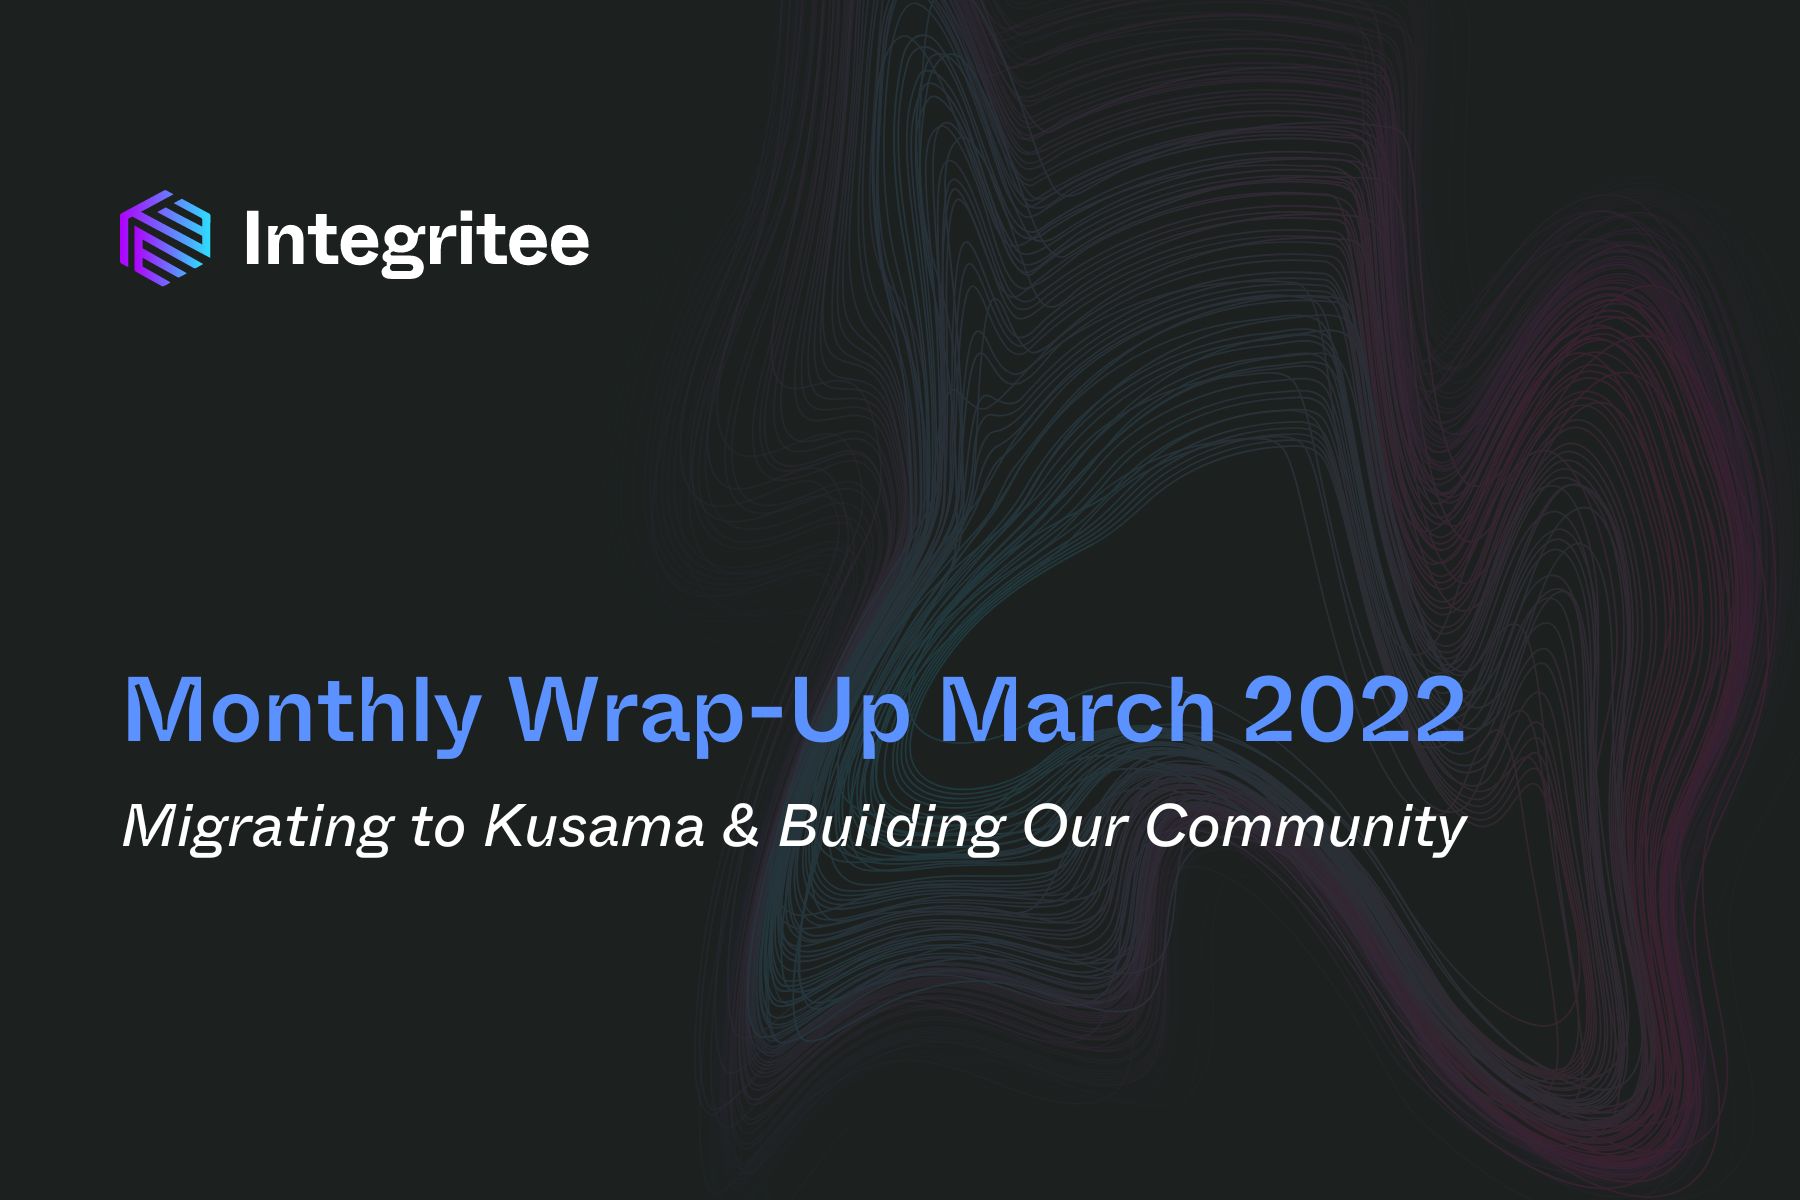 Monthly Wrap-Up March 2022: Migrating to Kusama & Building Our Community